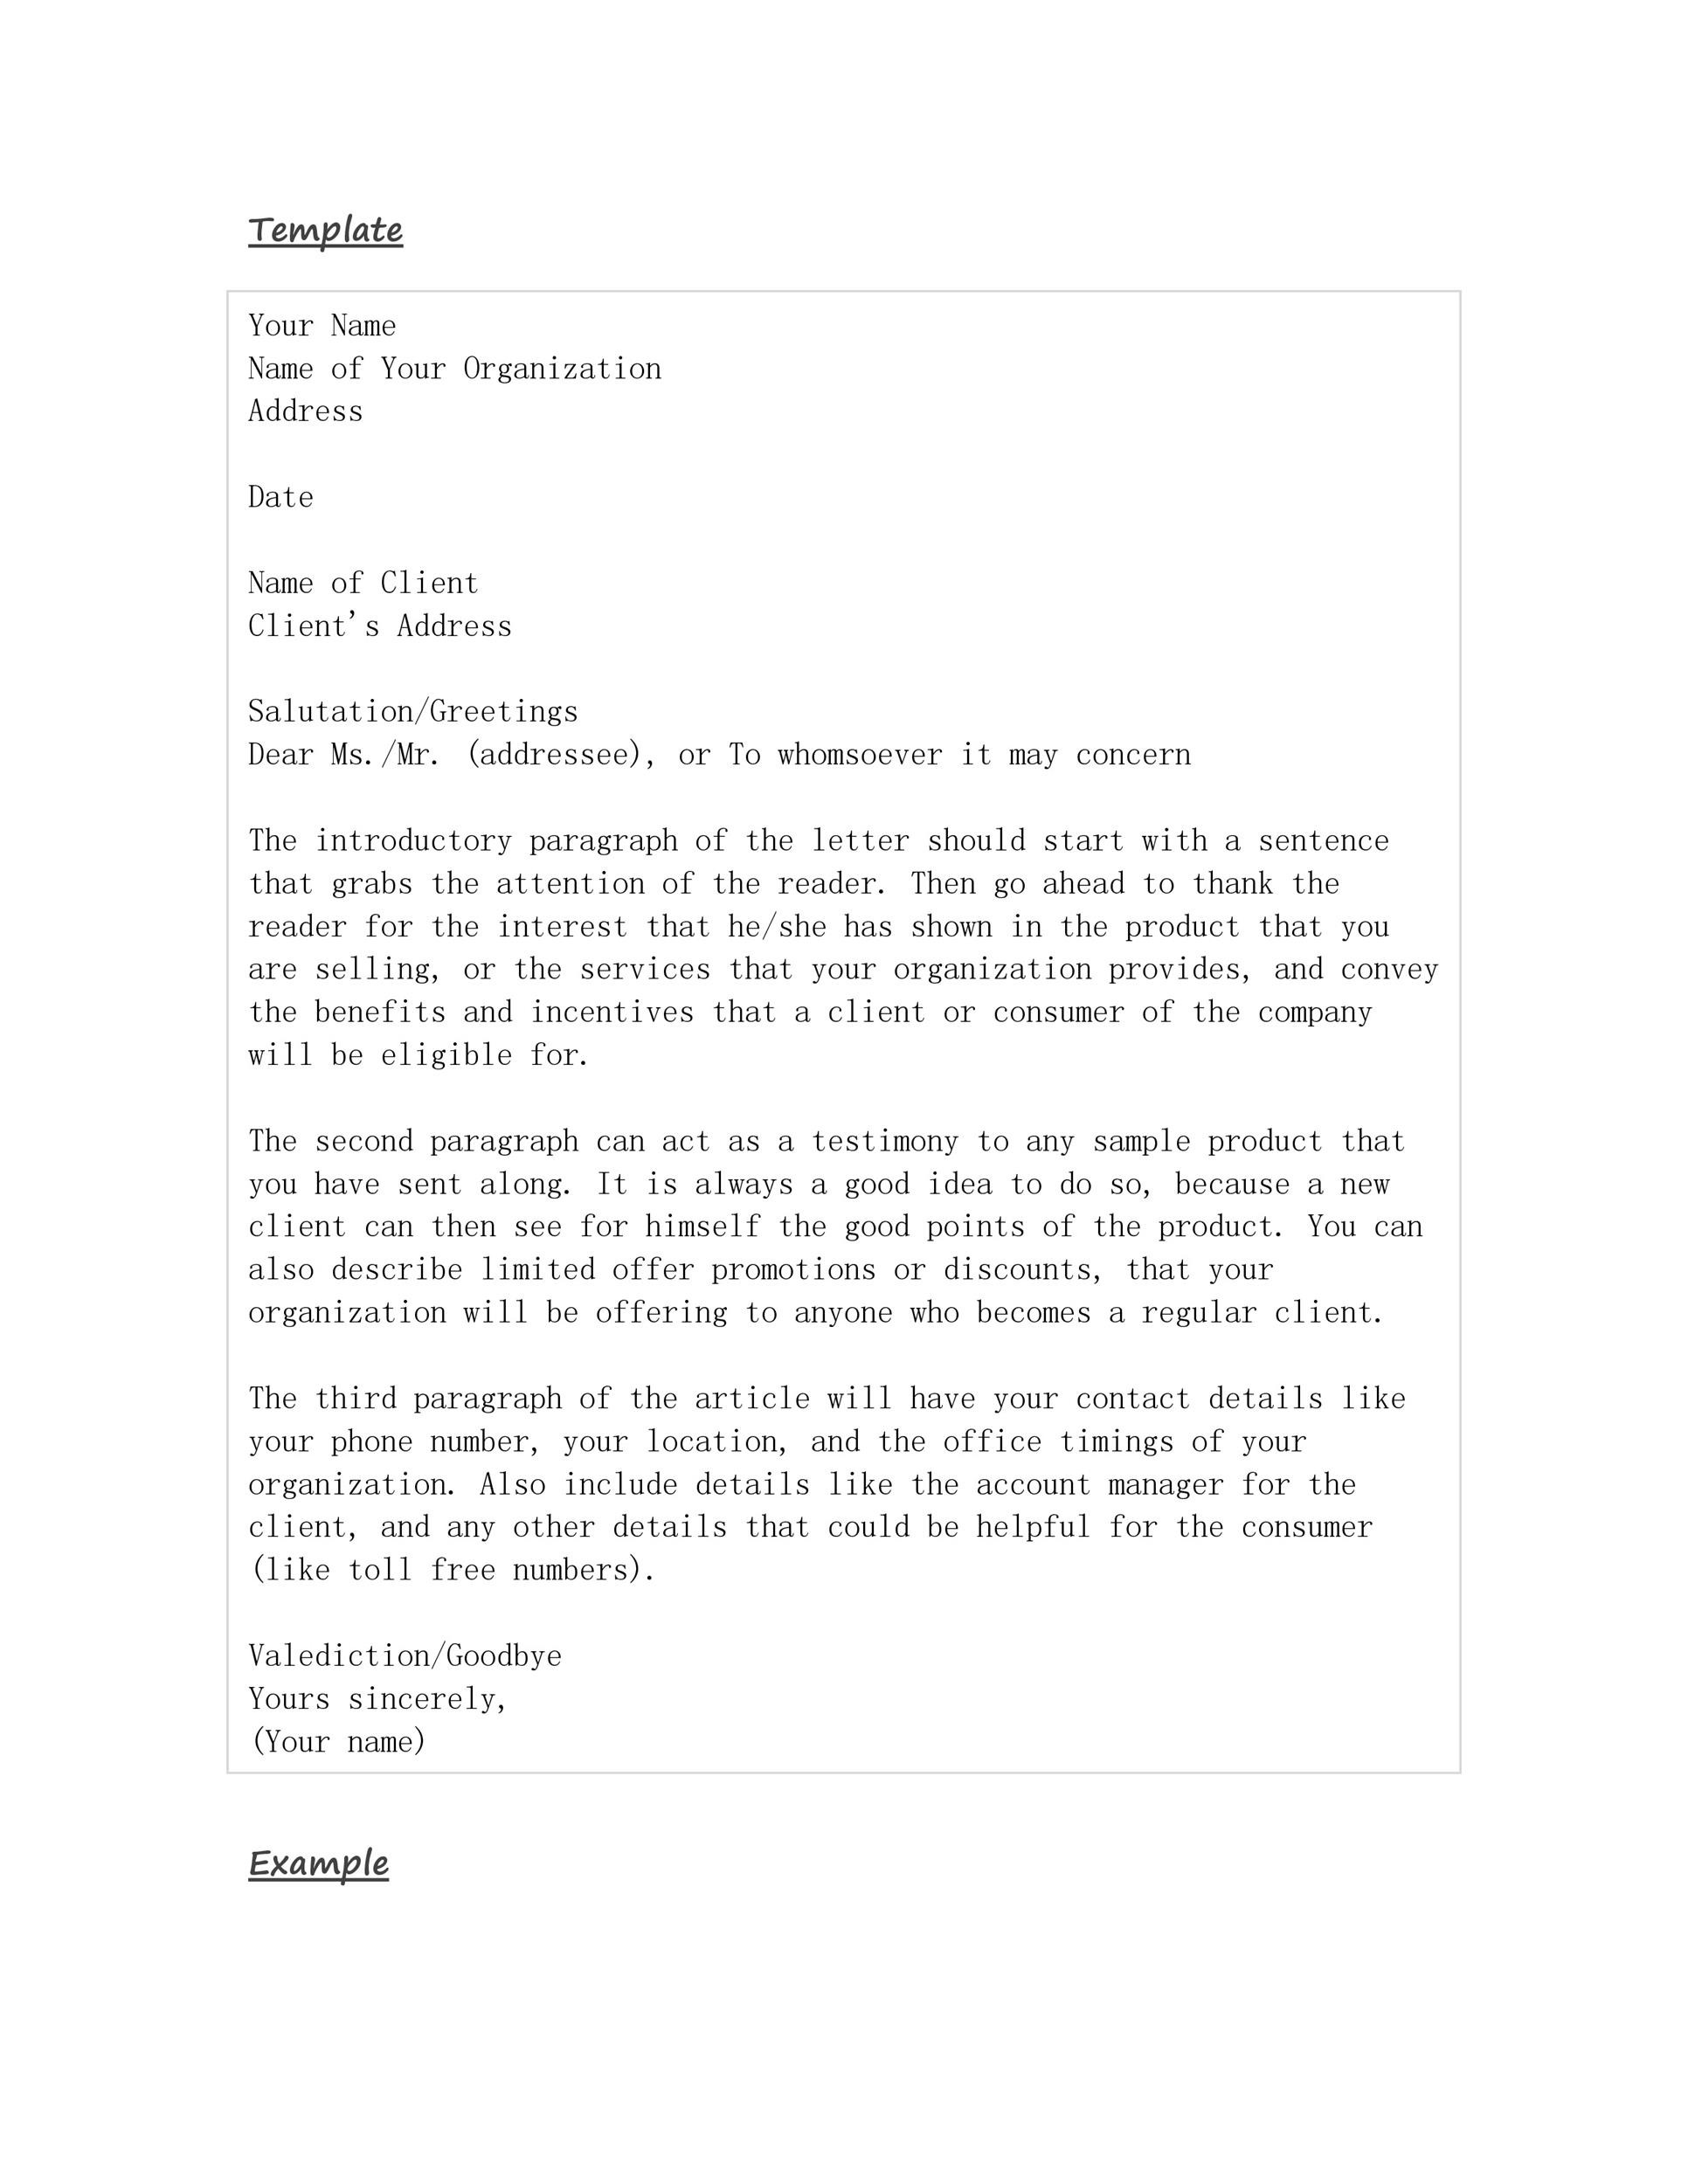 50 Effective Sales Letter Templates W Examples ᐅ Templatelab